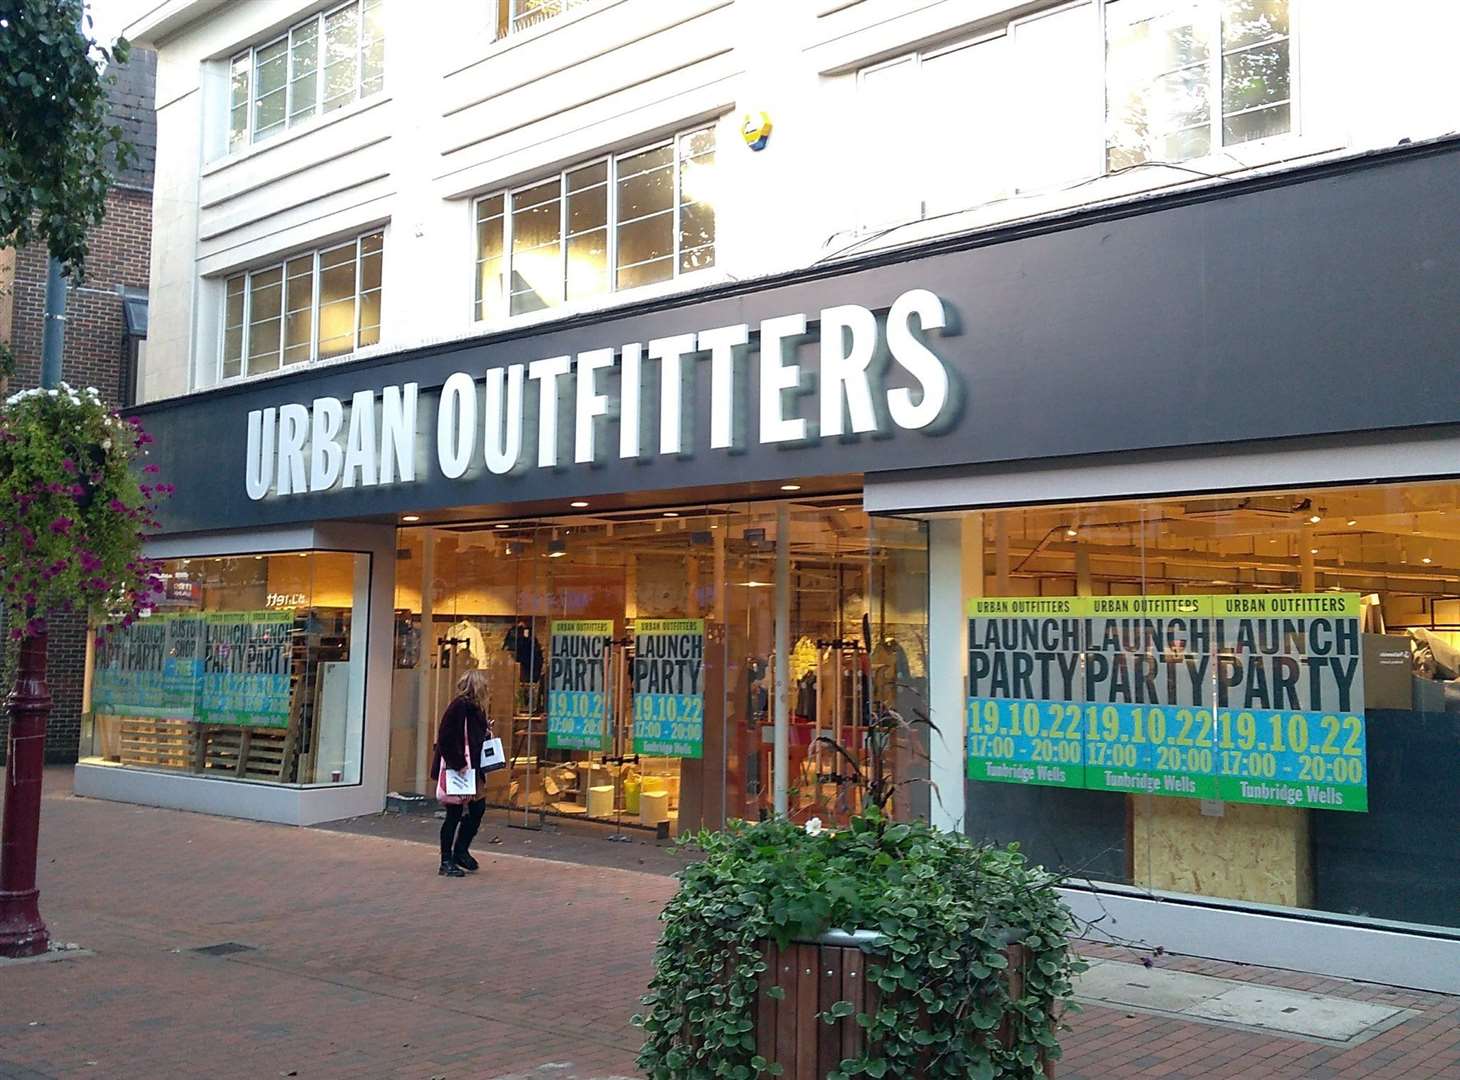 Urban Outfitters are opening in Tunbridge Wells. Picture: Cllr Nicholas Pope